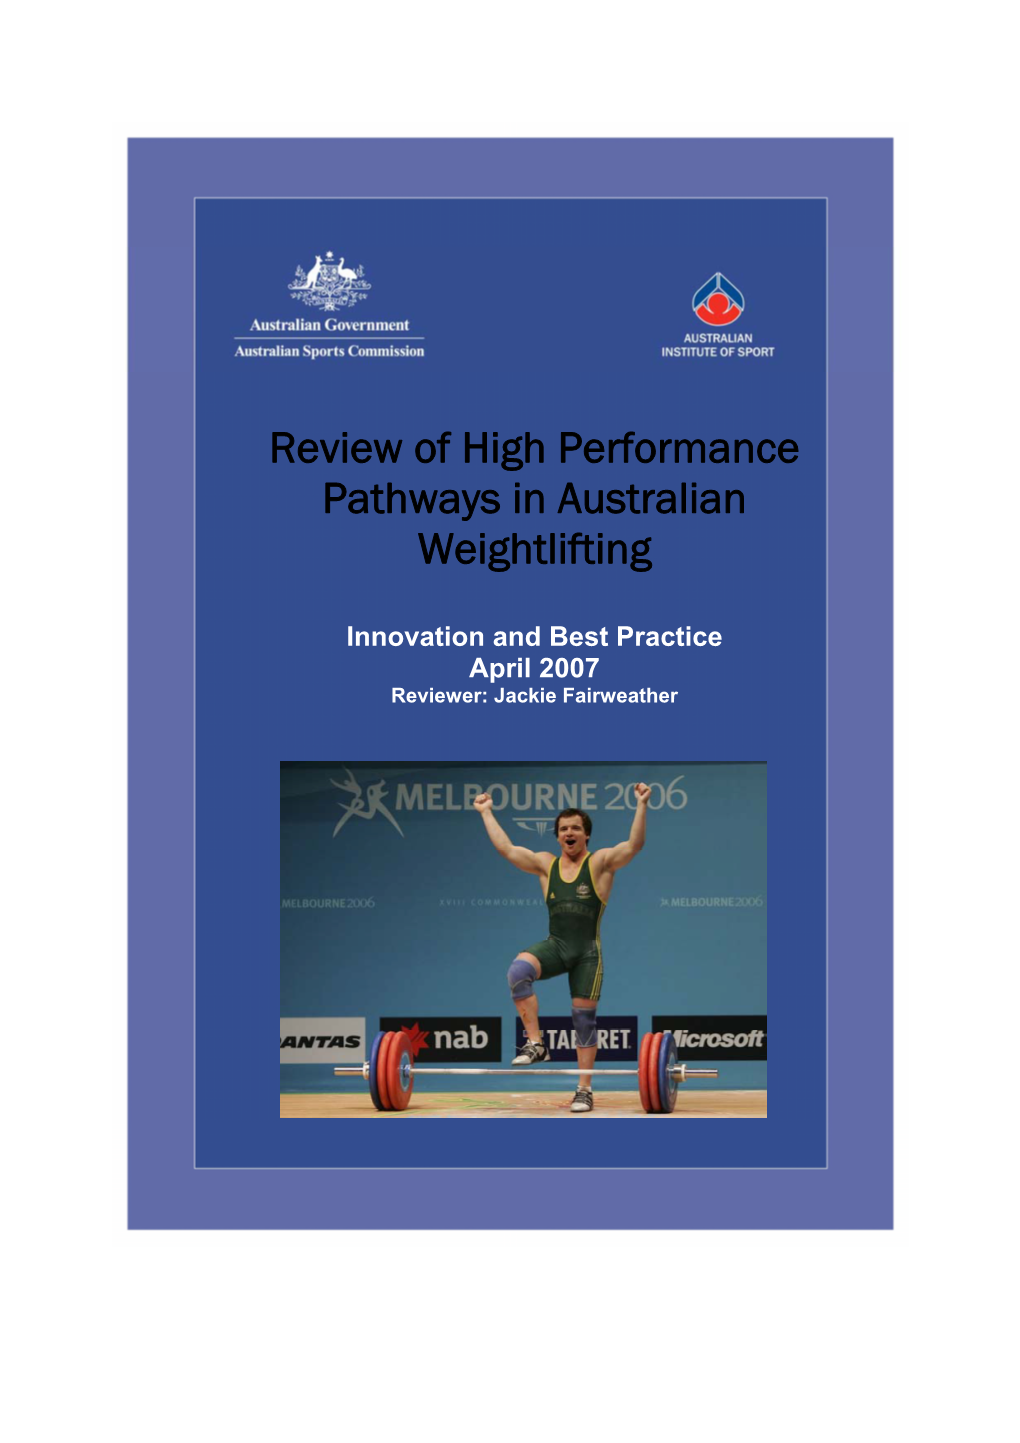 Review of High Performance Pathways in Australian Weightlifting